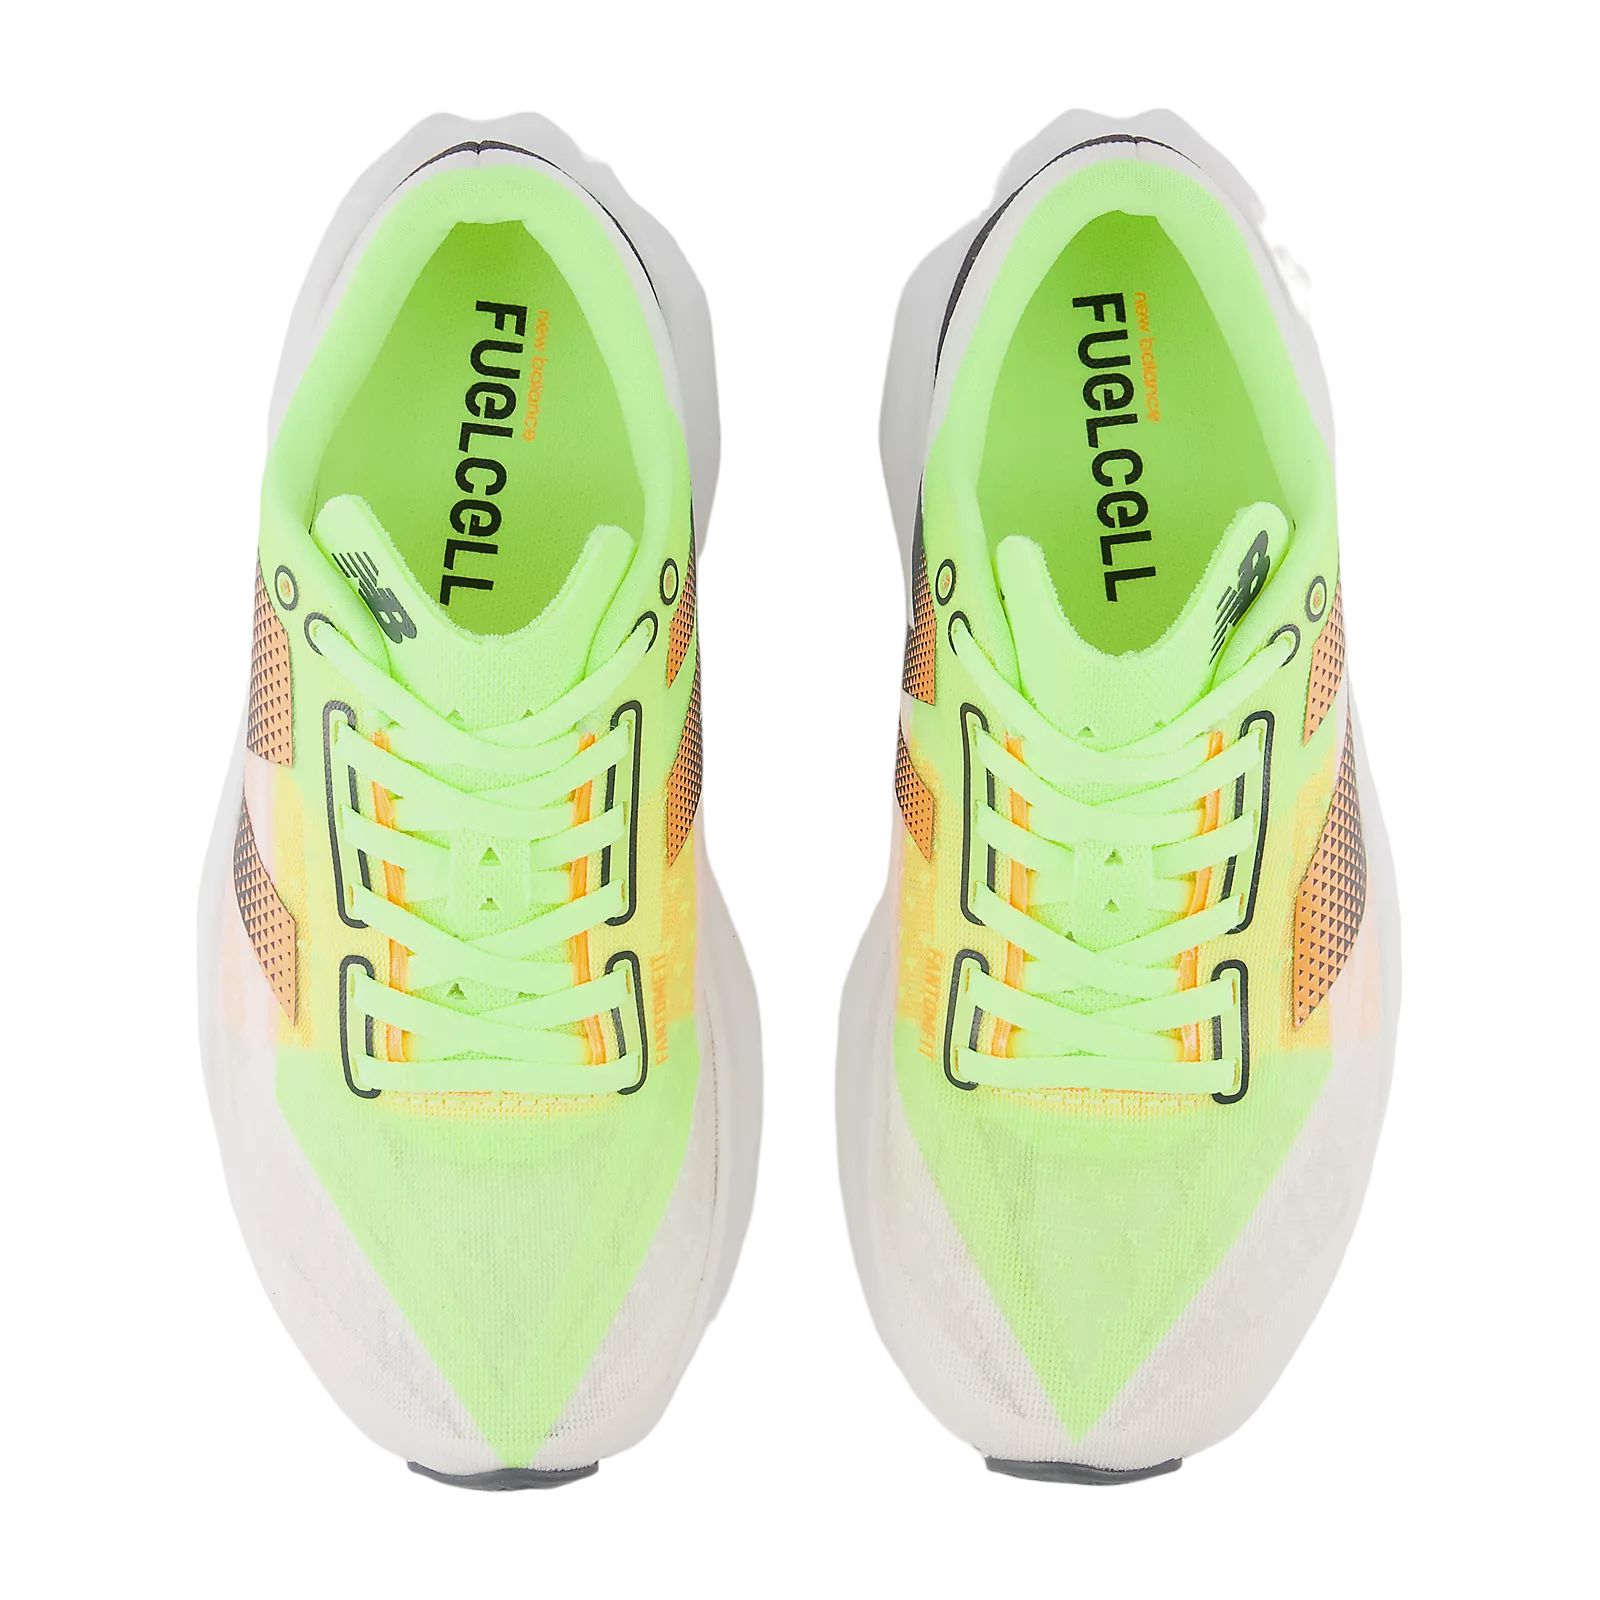 Men's FuelCell Rebel v4 Shoes White/Bleached Lime/Hot Mango 